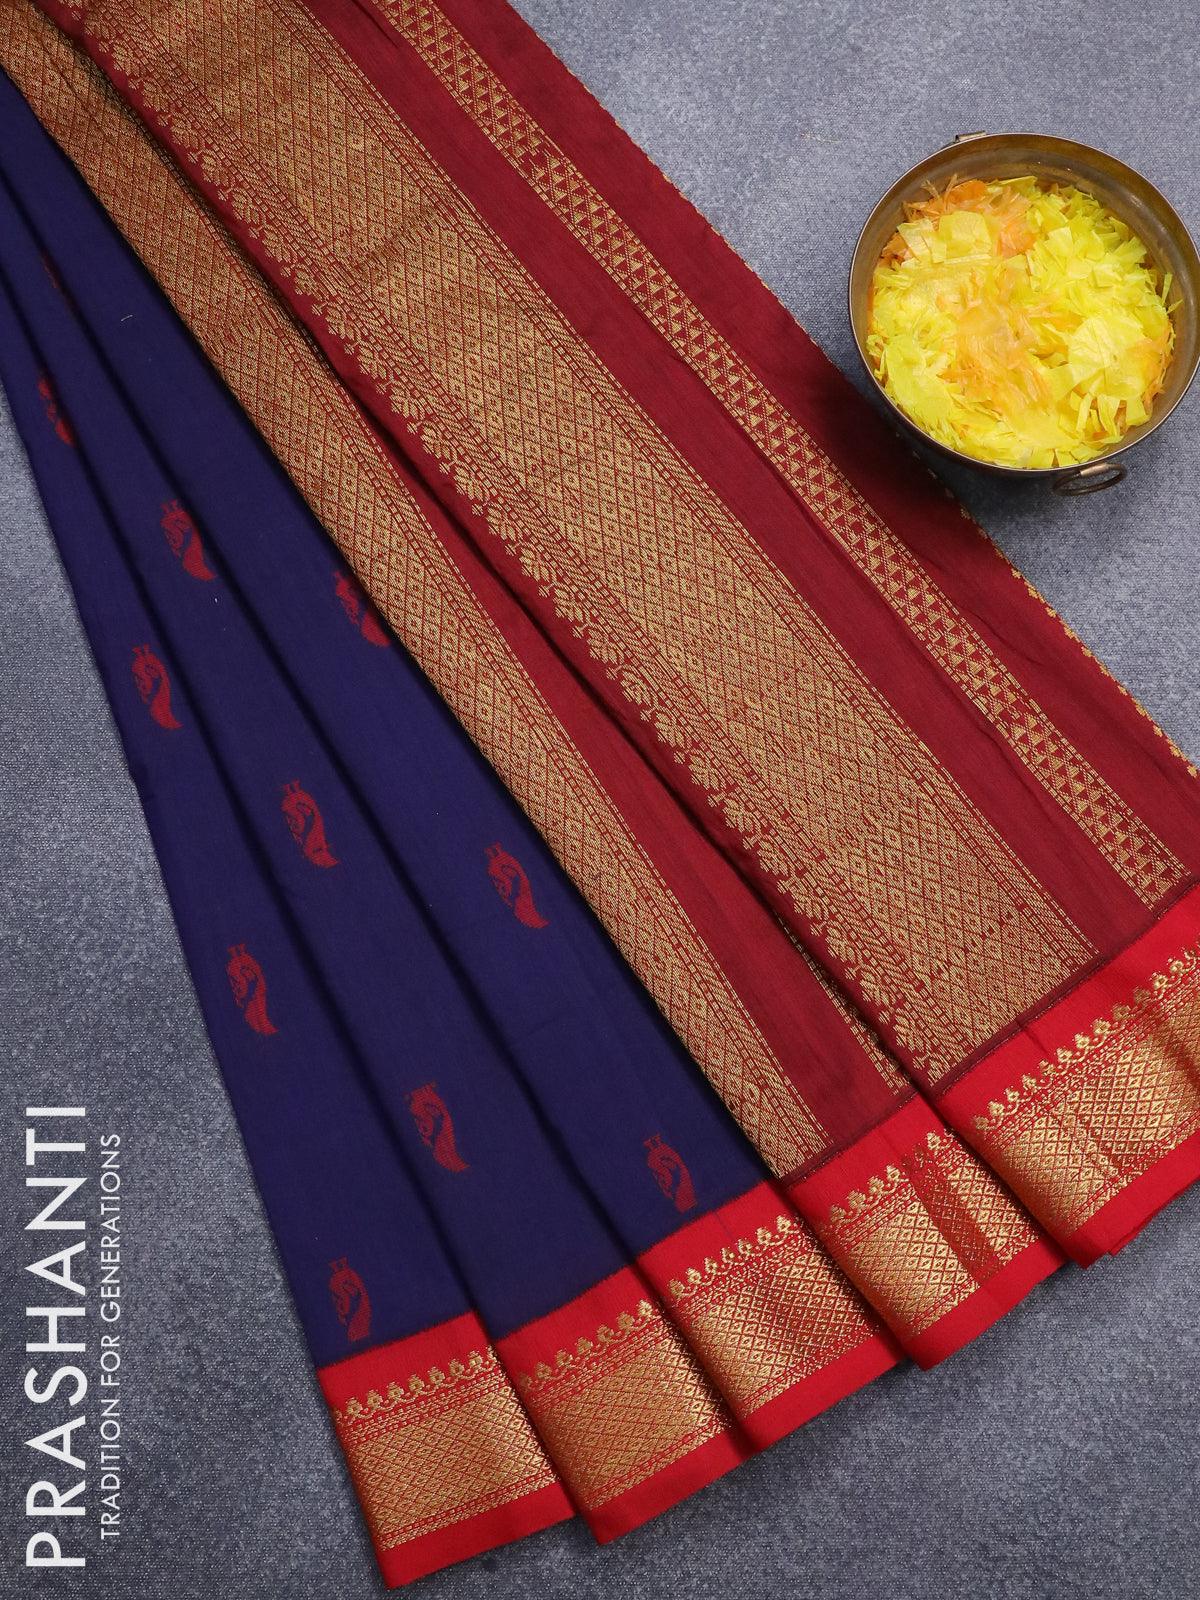 Kalyani cotton saree blue and red with thread woven buttas and